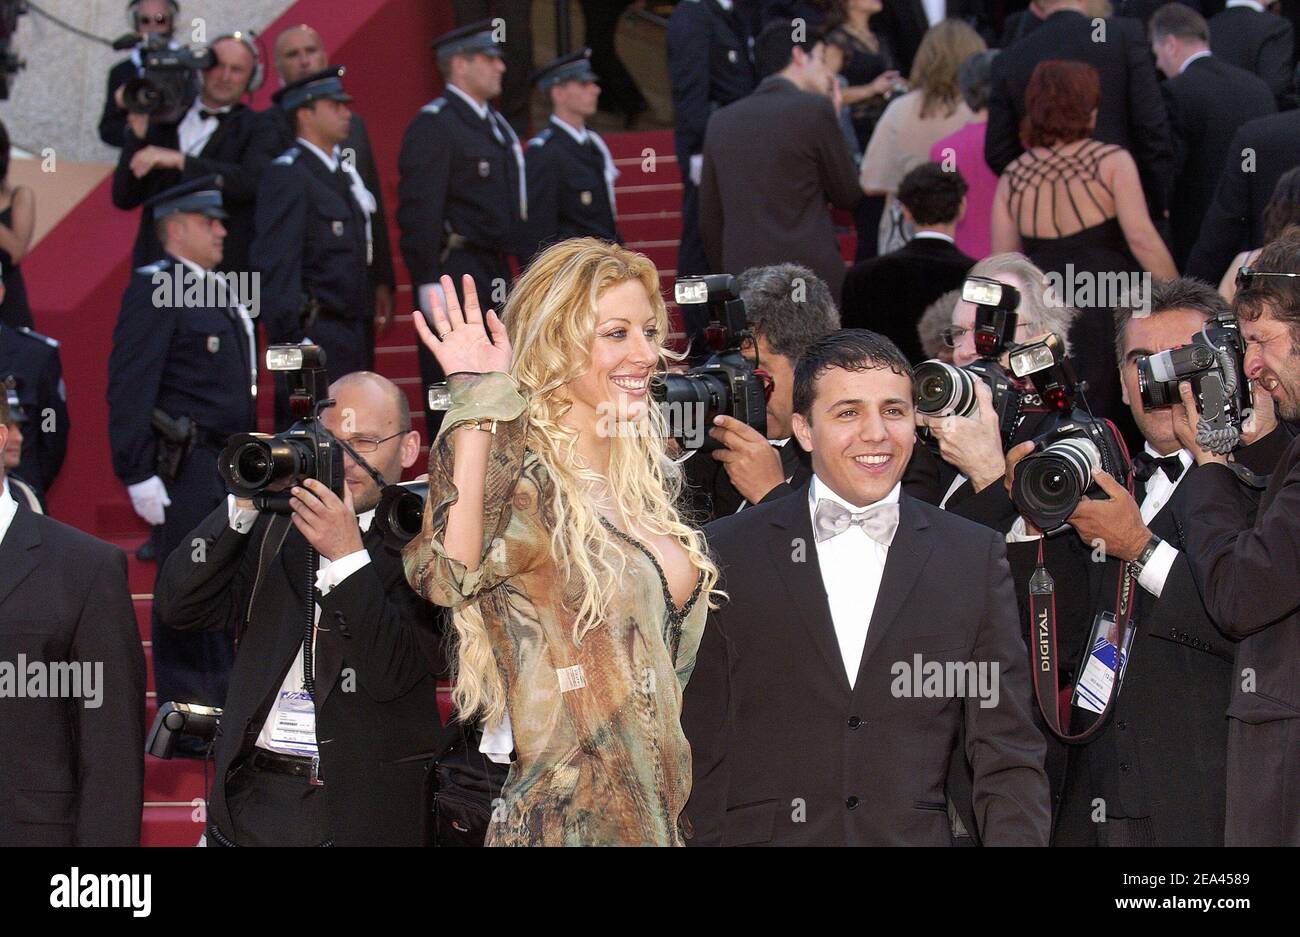 French reality TV star Loana Petrucciani and singer Faudel arrive for the screening of the film 'The Three Burials of Melquiades Estrada' directed by Tommy Lee Jones at the 58th International Cannes Film Festival, in Cannes, southern France, on May 20, 2005. Photo by Hahn-Nebinger-Klein/ABACA. Stock Photo